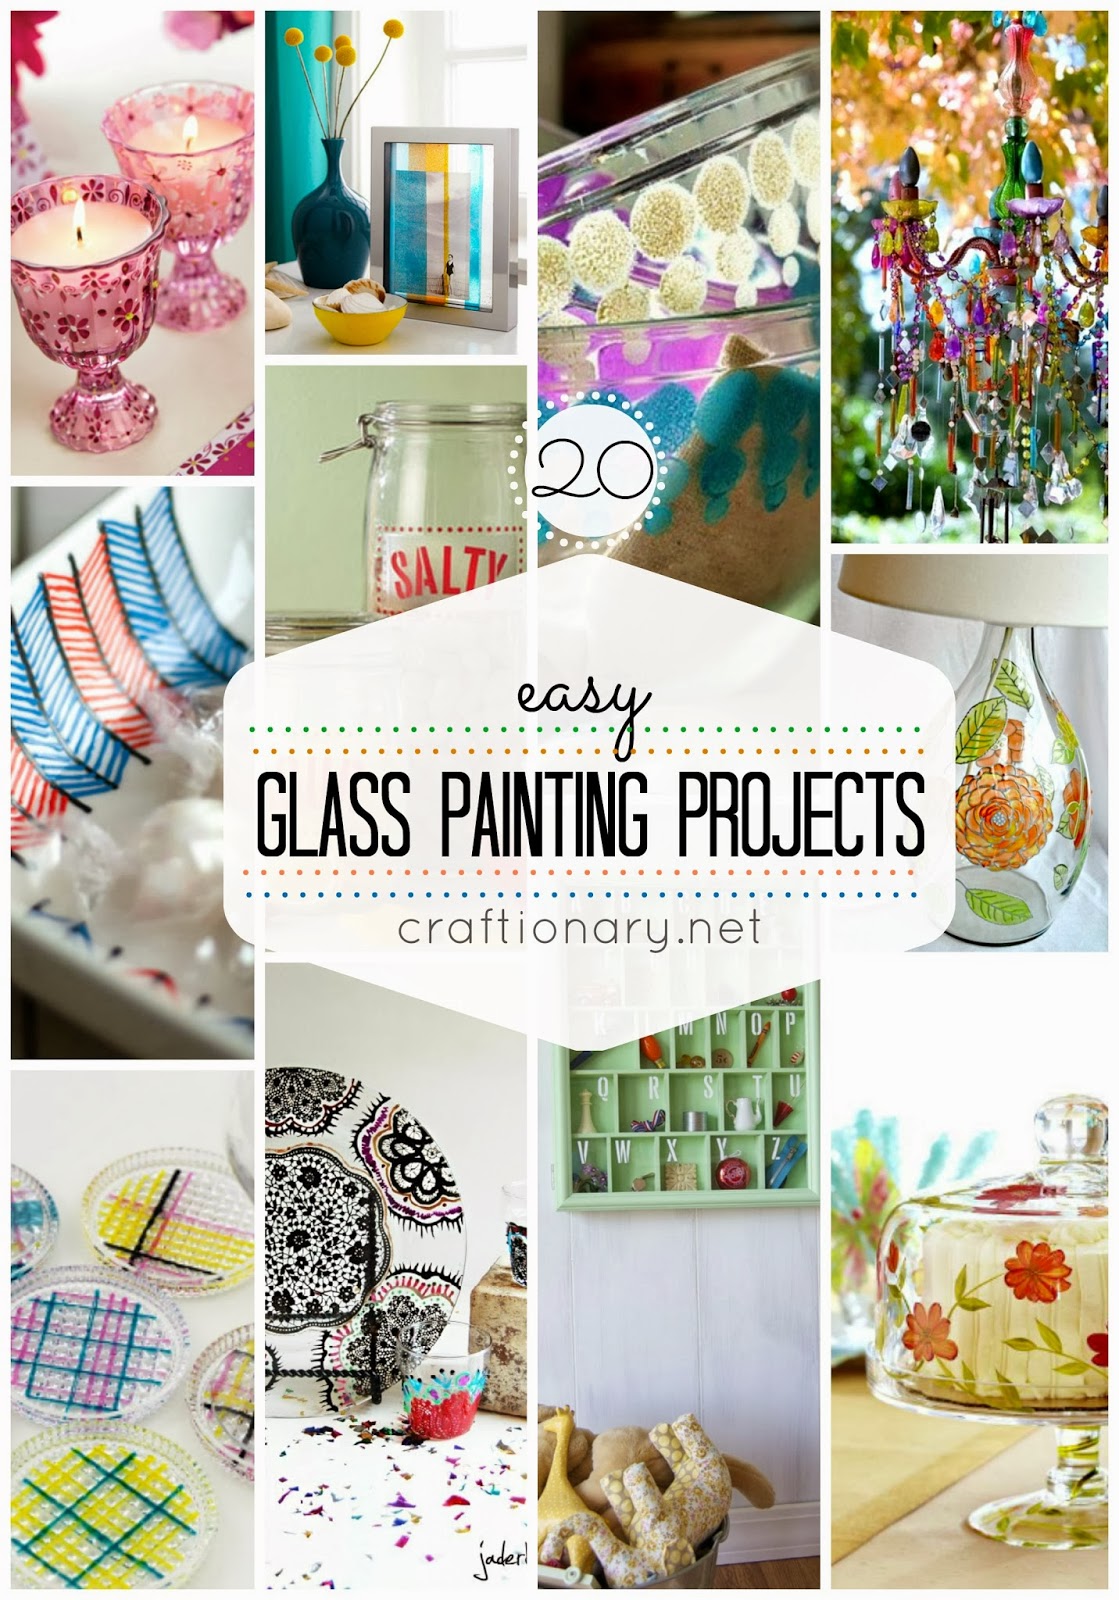 Projects: painting Painting DIY  Projects easy glass Diy Easy 20 Glass